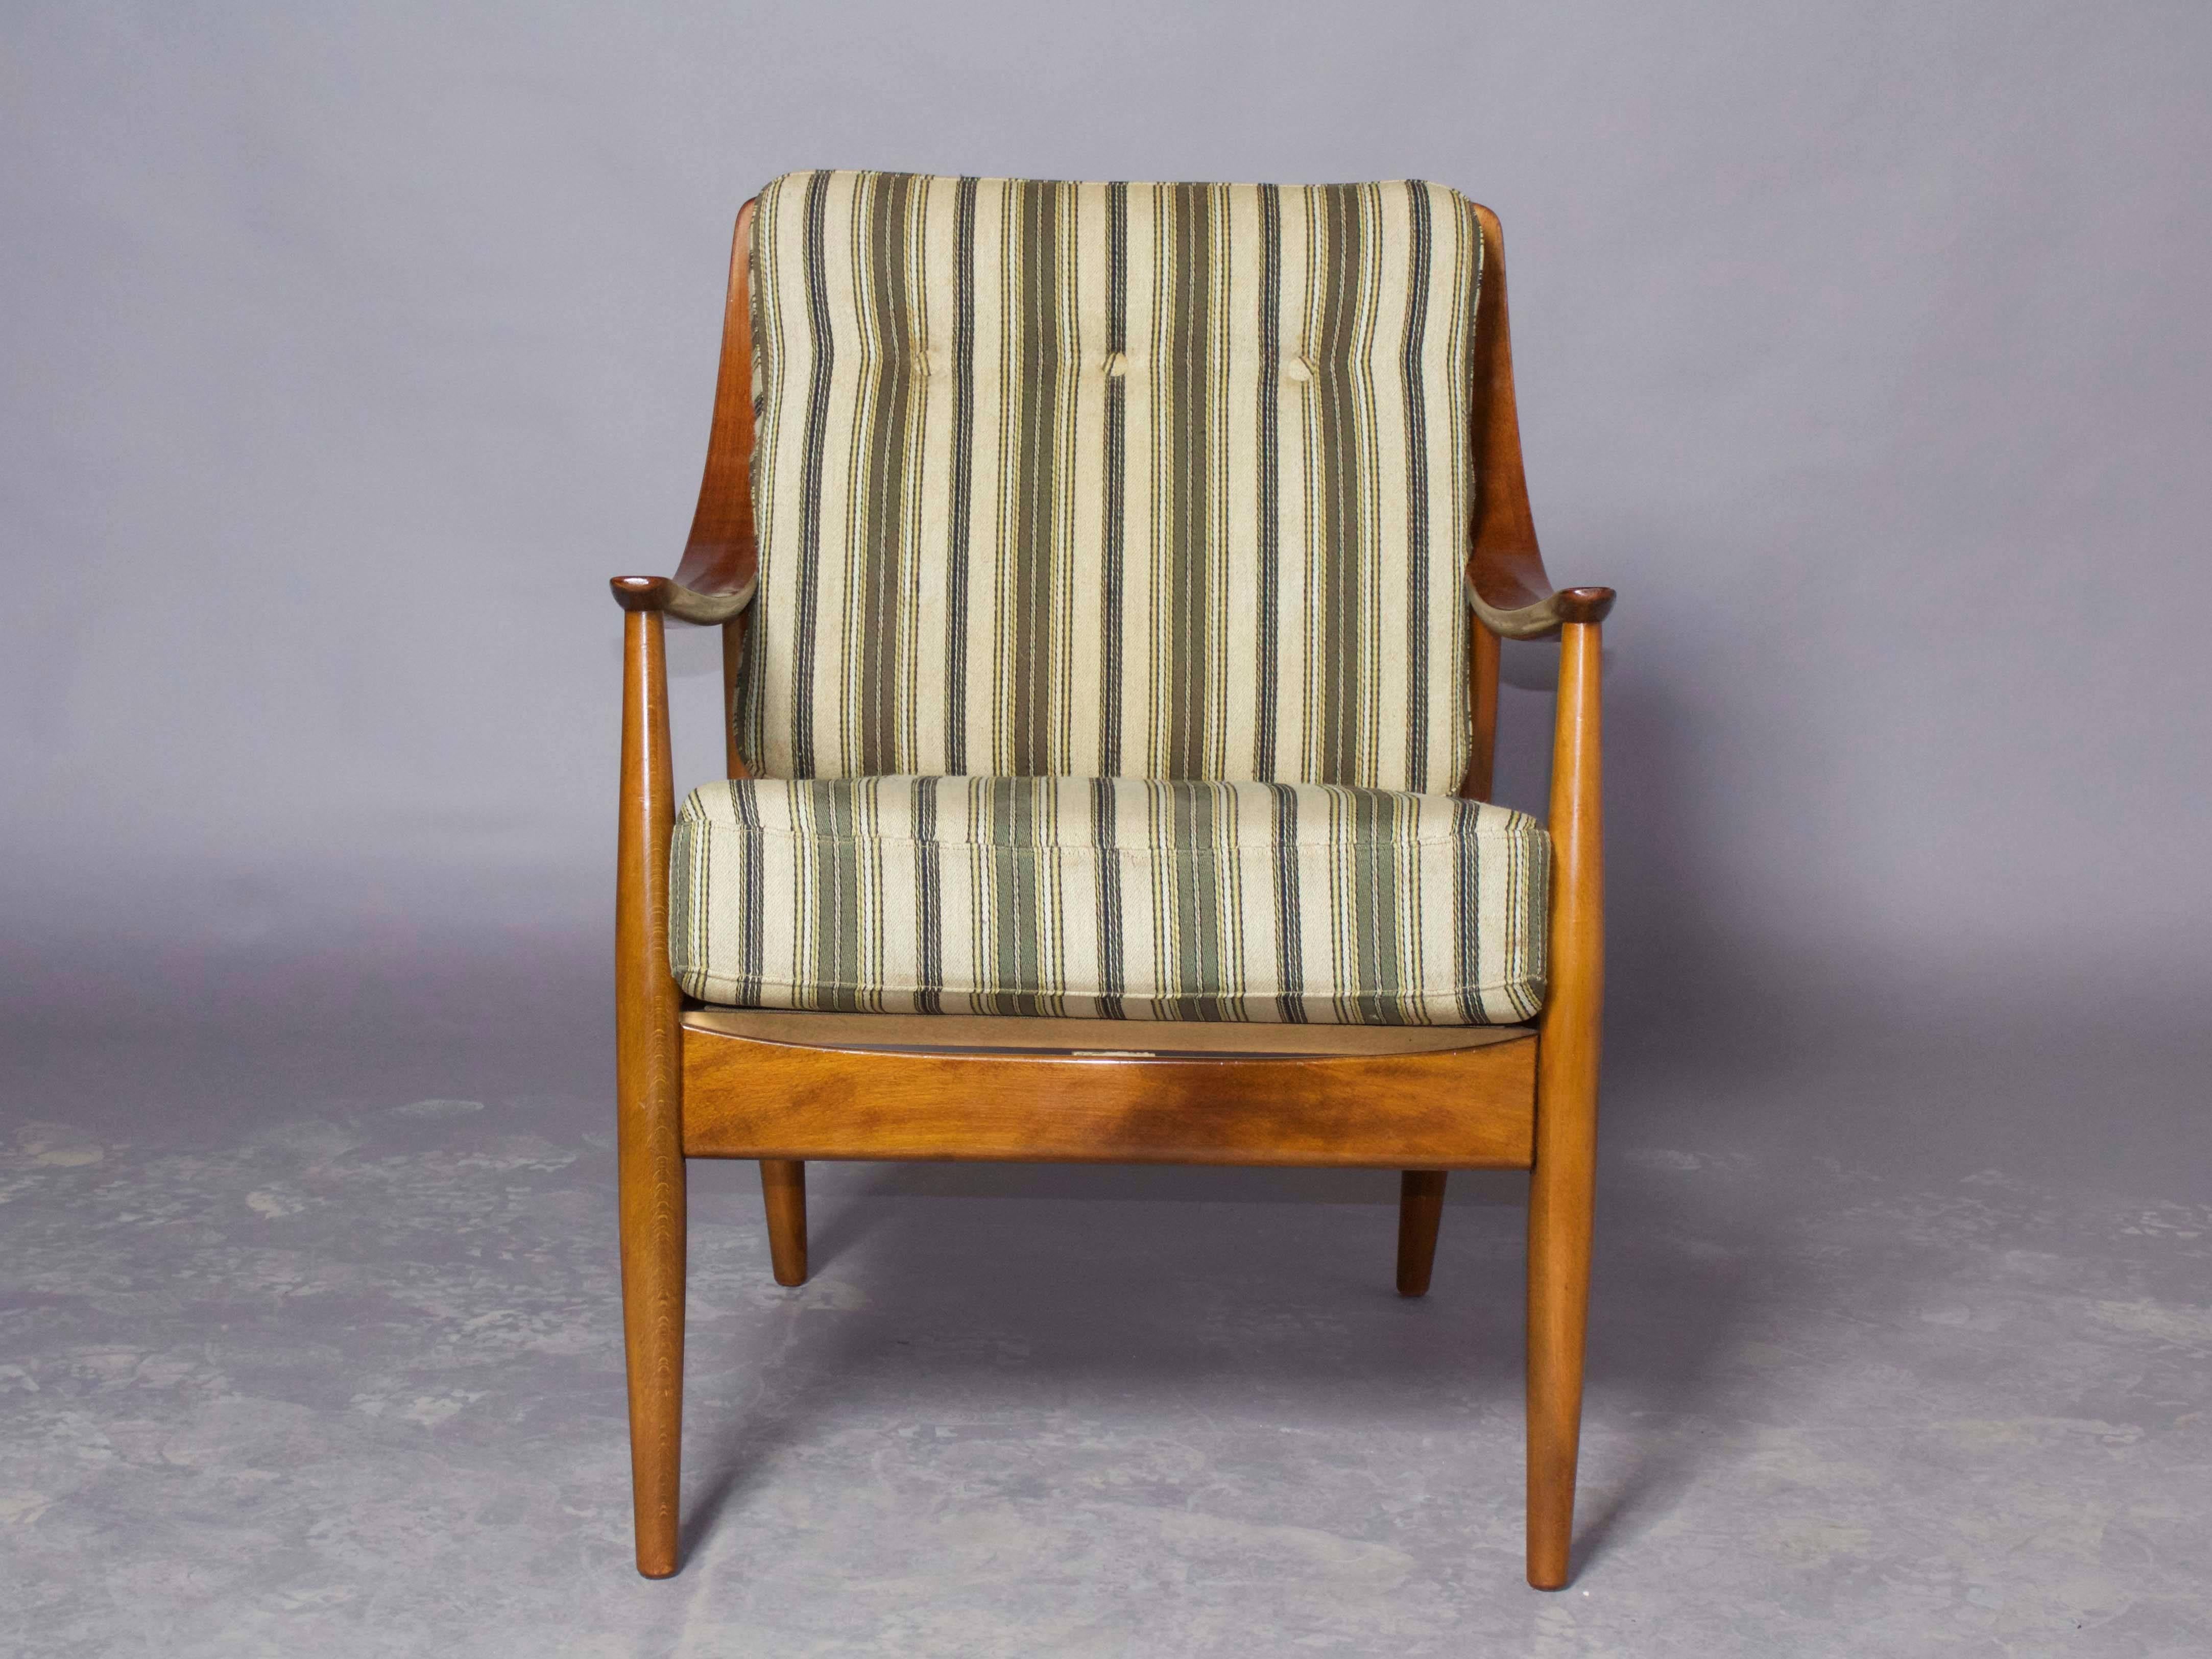 Hvidt and Molgaard Armchair Model FD-146 in Mahogany In Excellent Condition For Sale In New York, NY